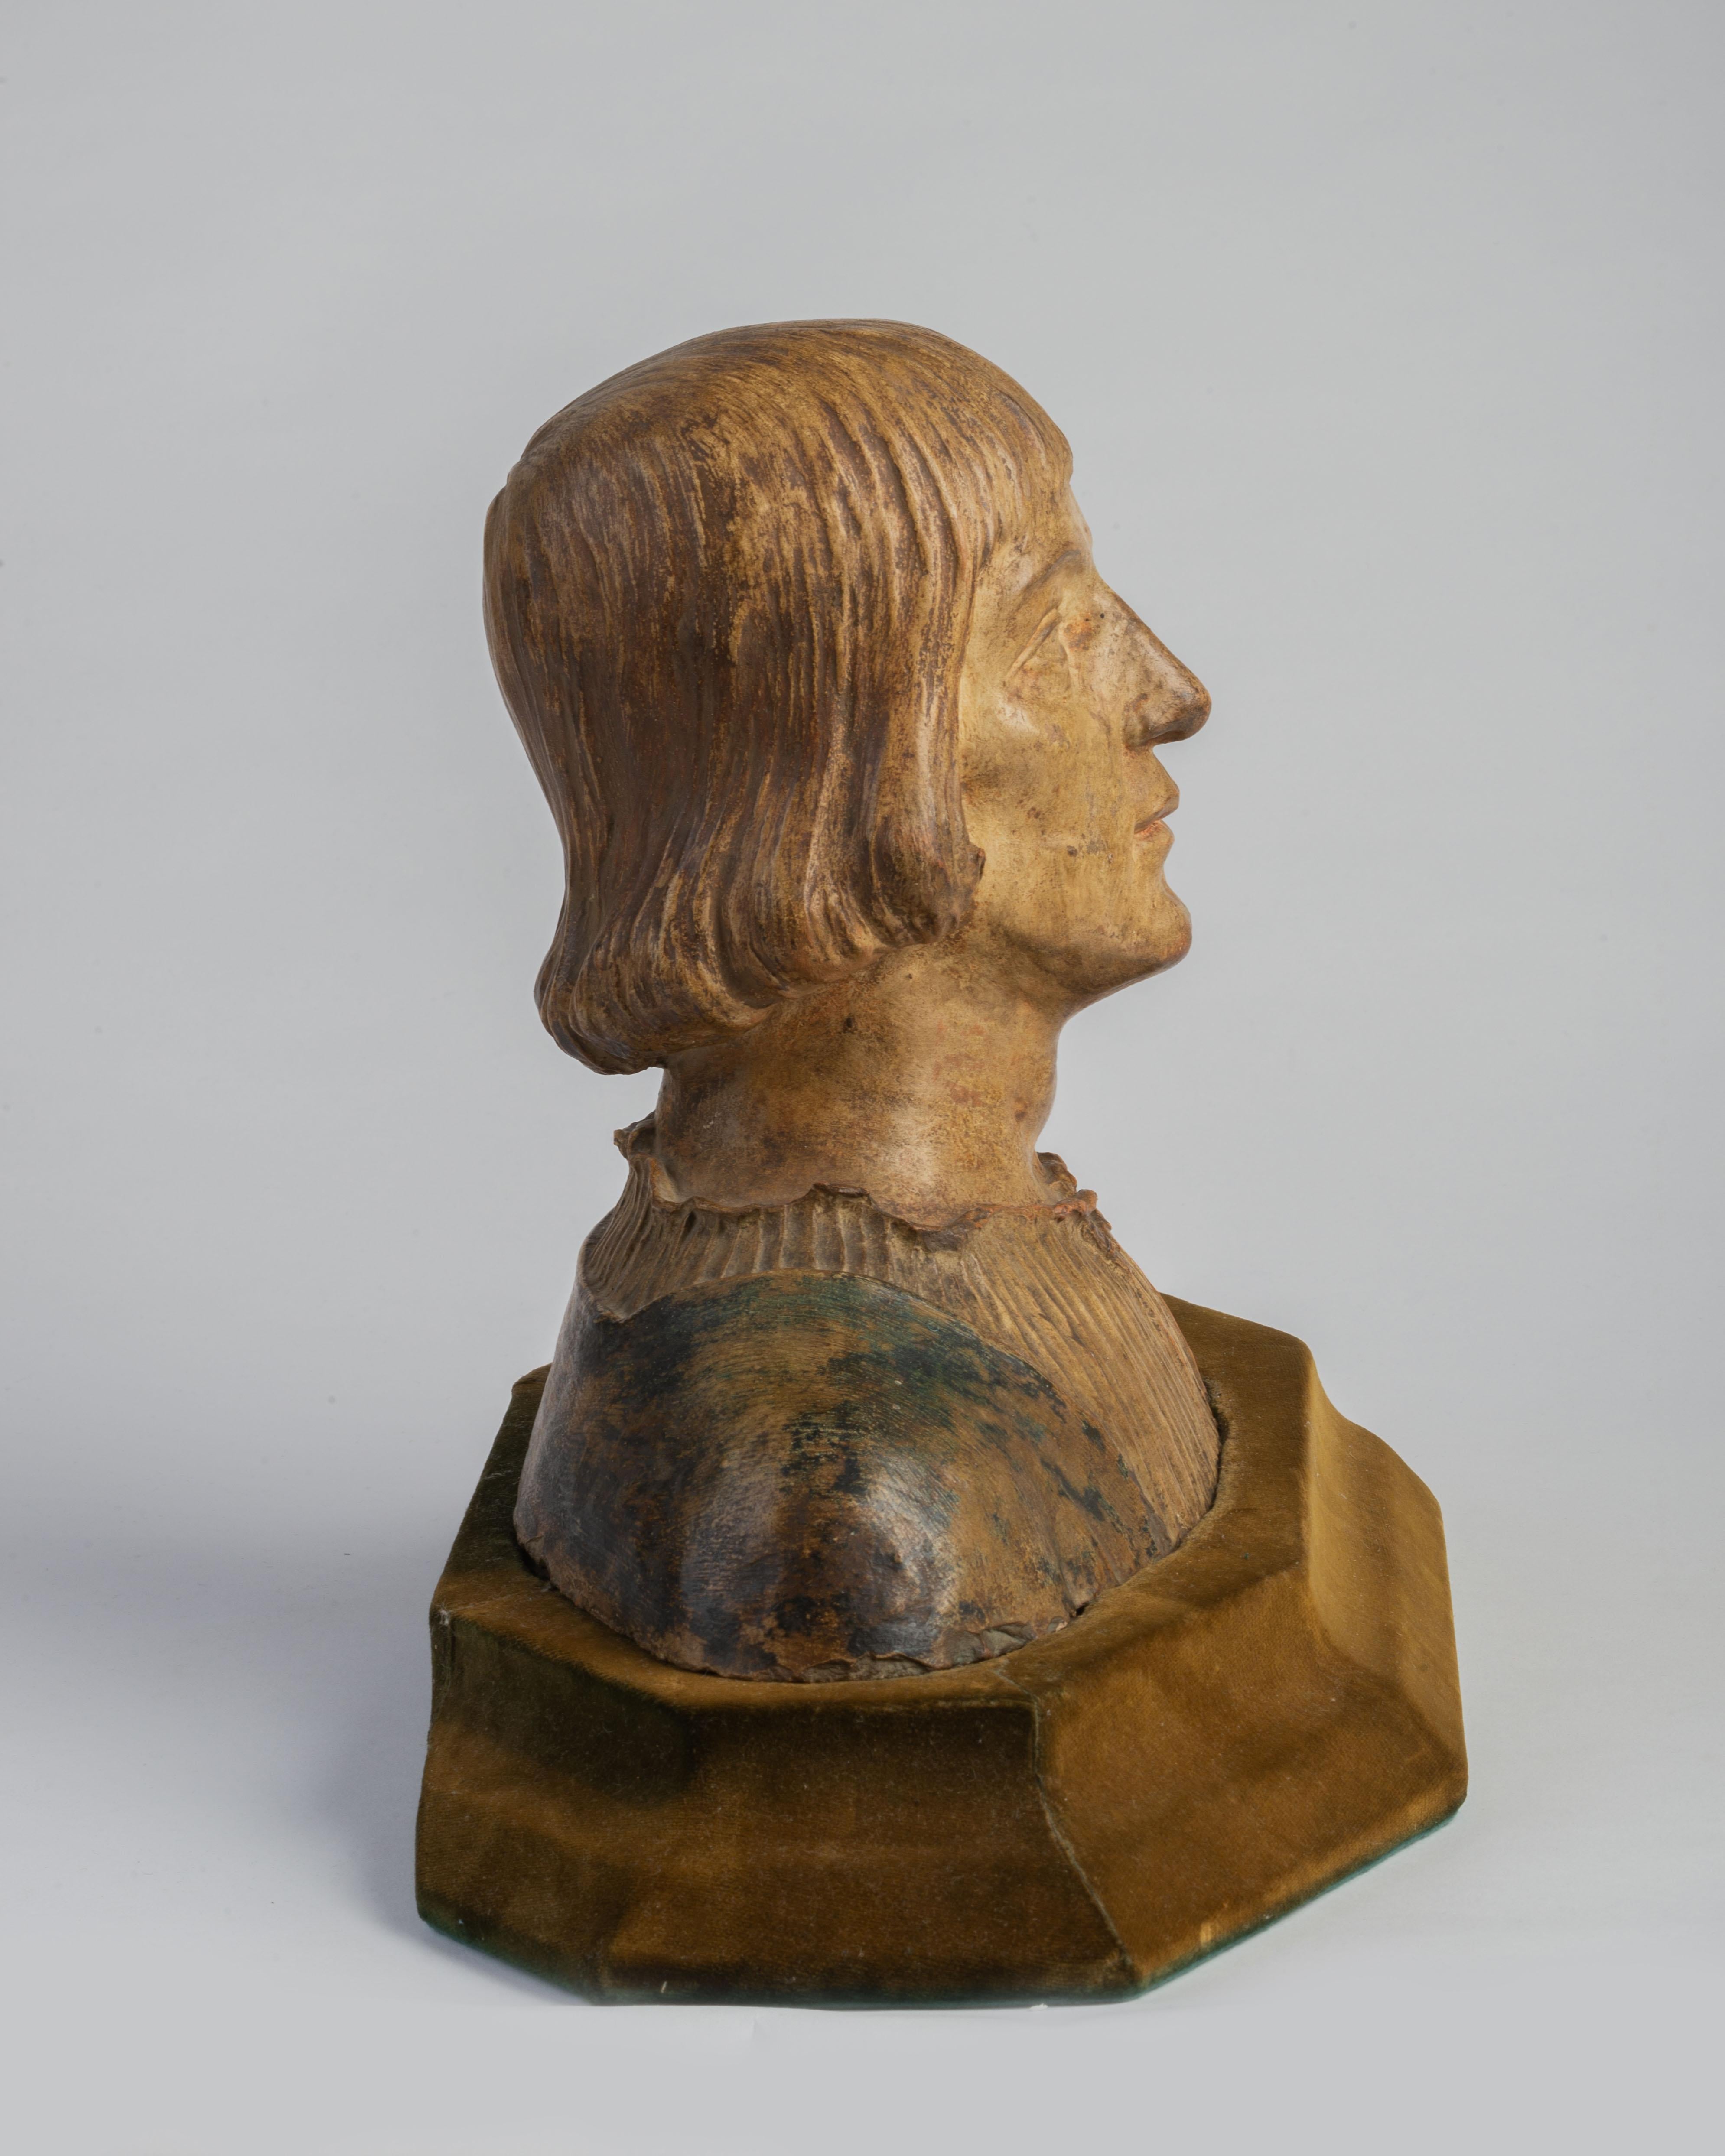 Raised on an olive velvet base. Dimensions include the base.
Portraiture is often seen as the quintessential Renaissance art form, and clay was used increasingly during the 15th century to produce life-like busts. It was an ideal medium to make